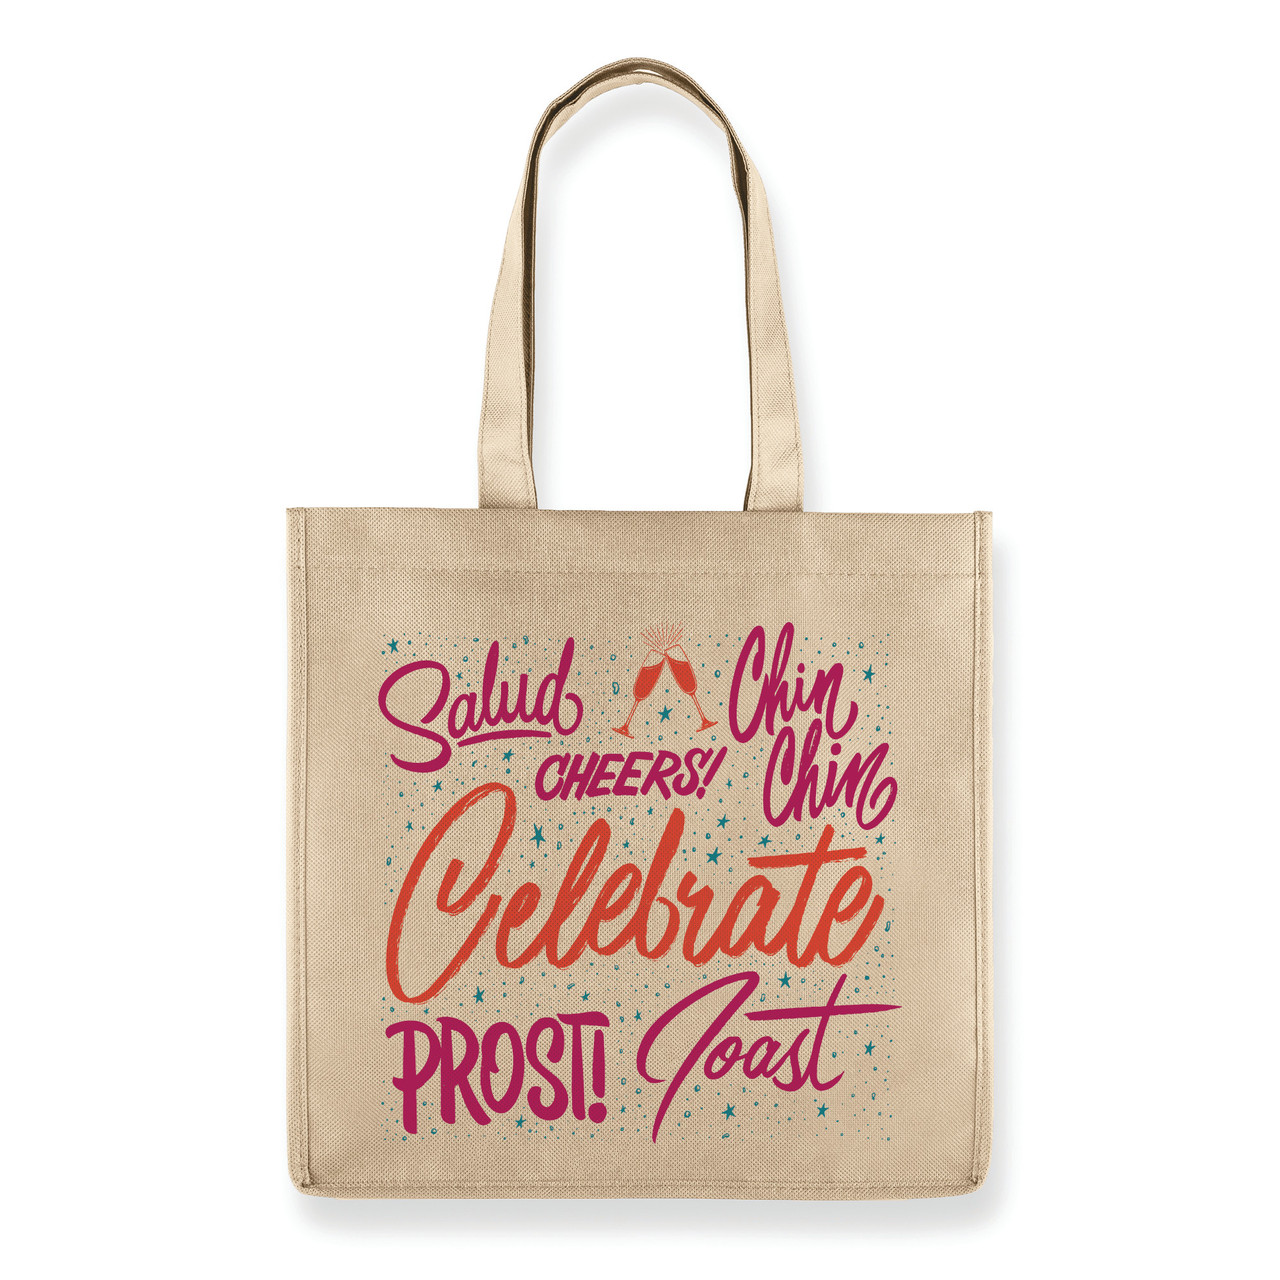 Cheers Sayings 6 Bottle Non-Woven Tote